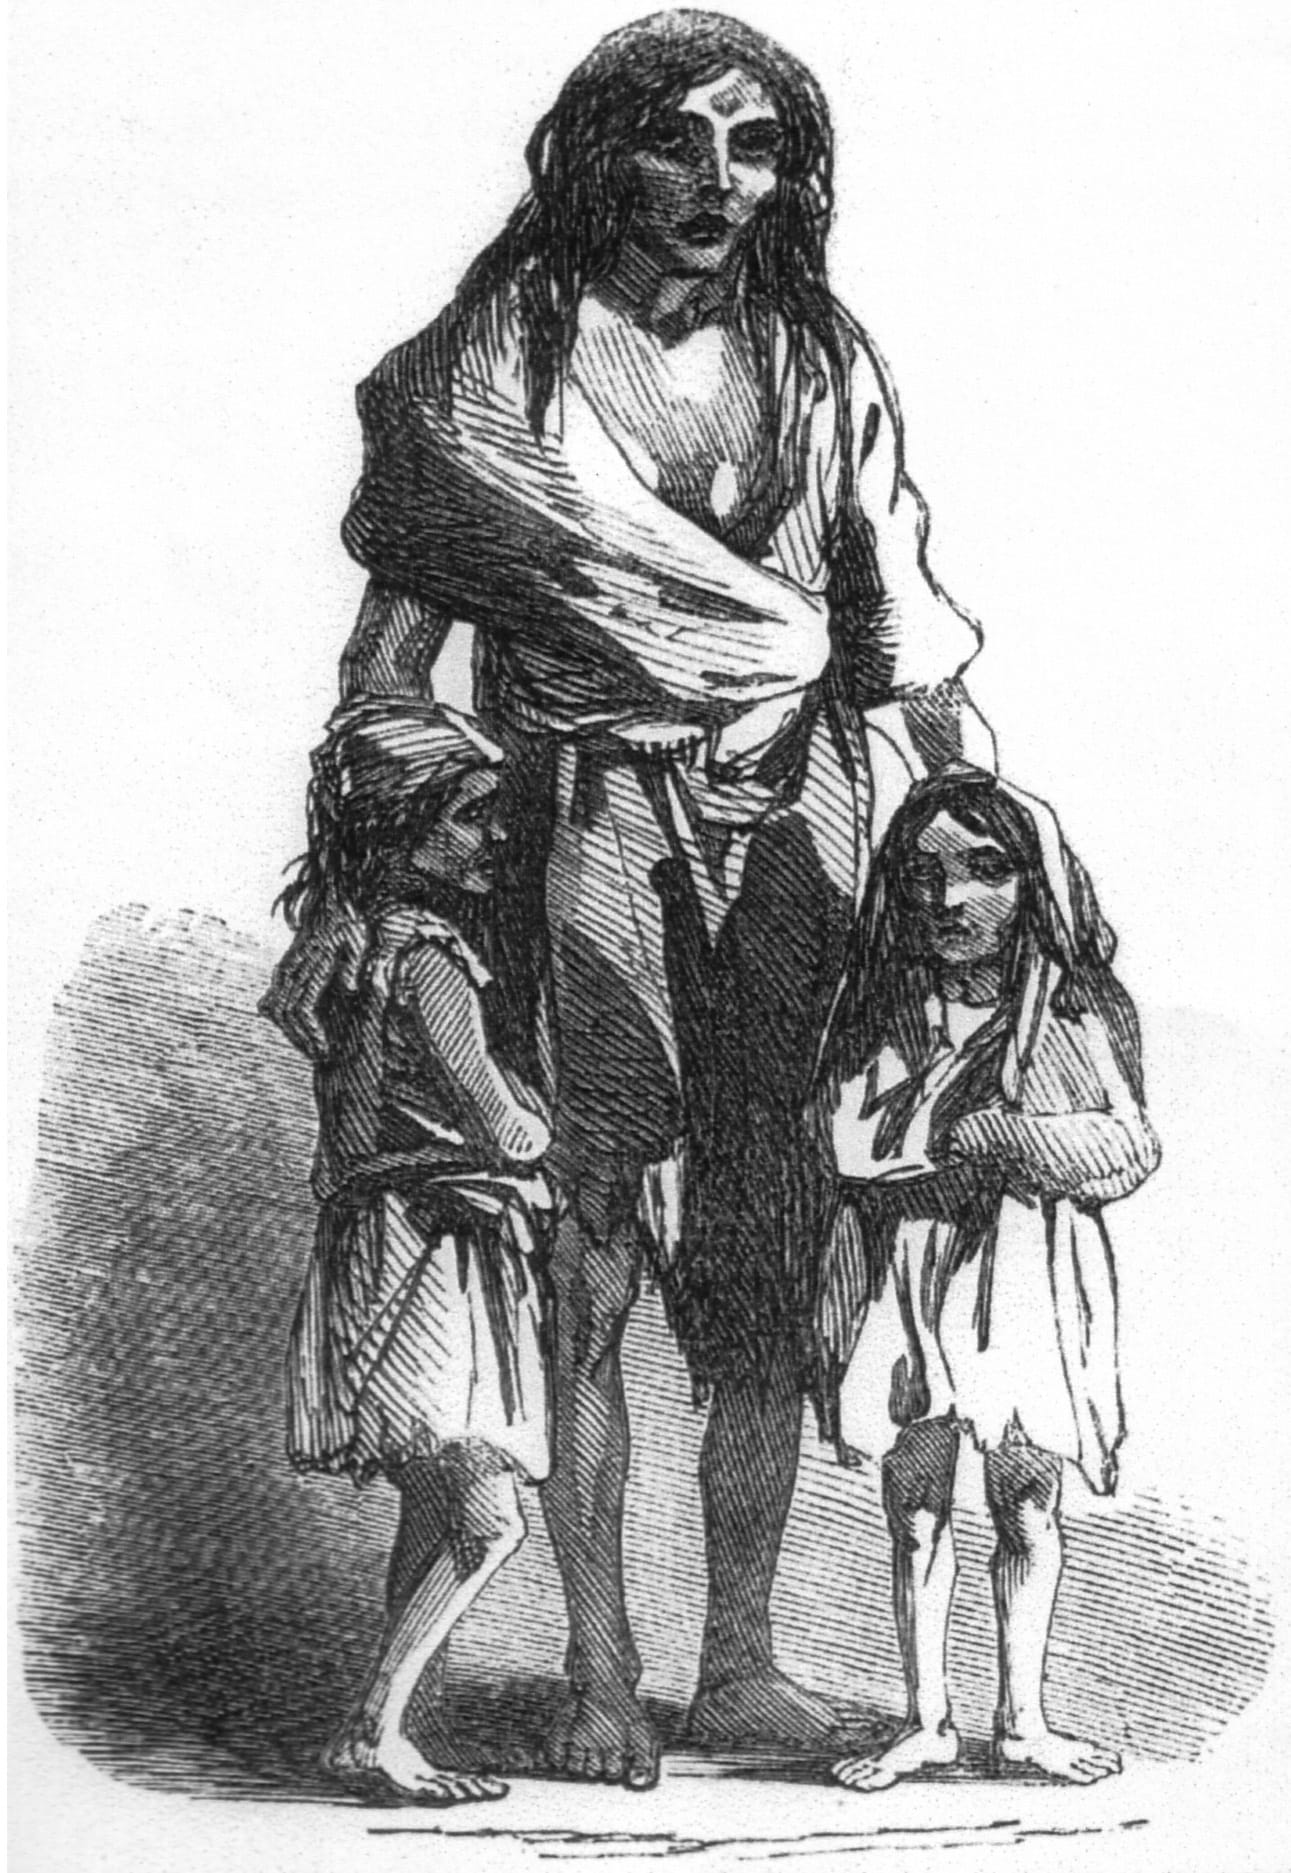 Drawing of famine victims by James Mahoney